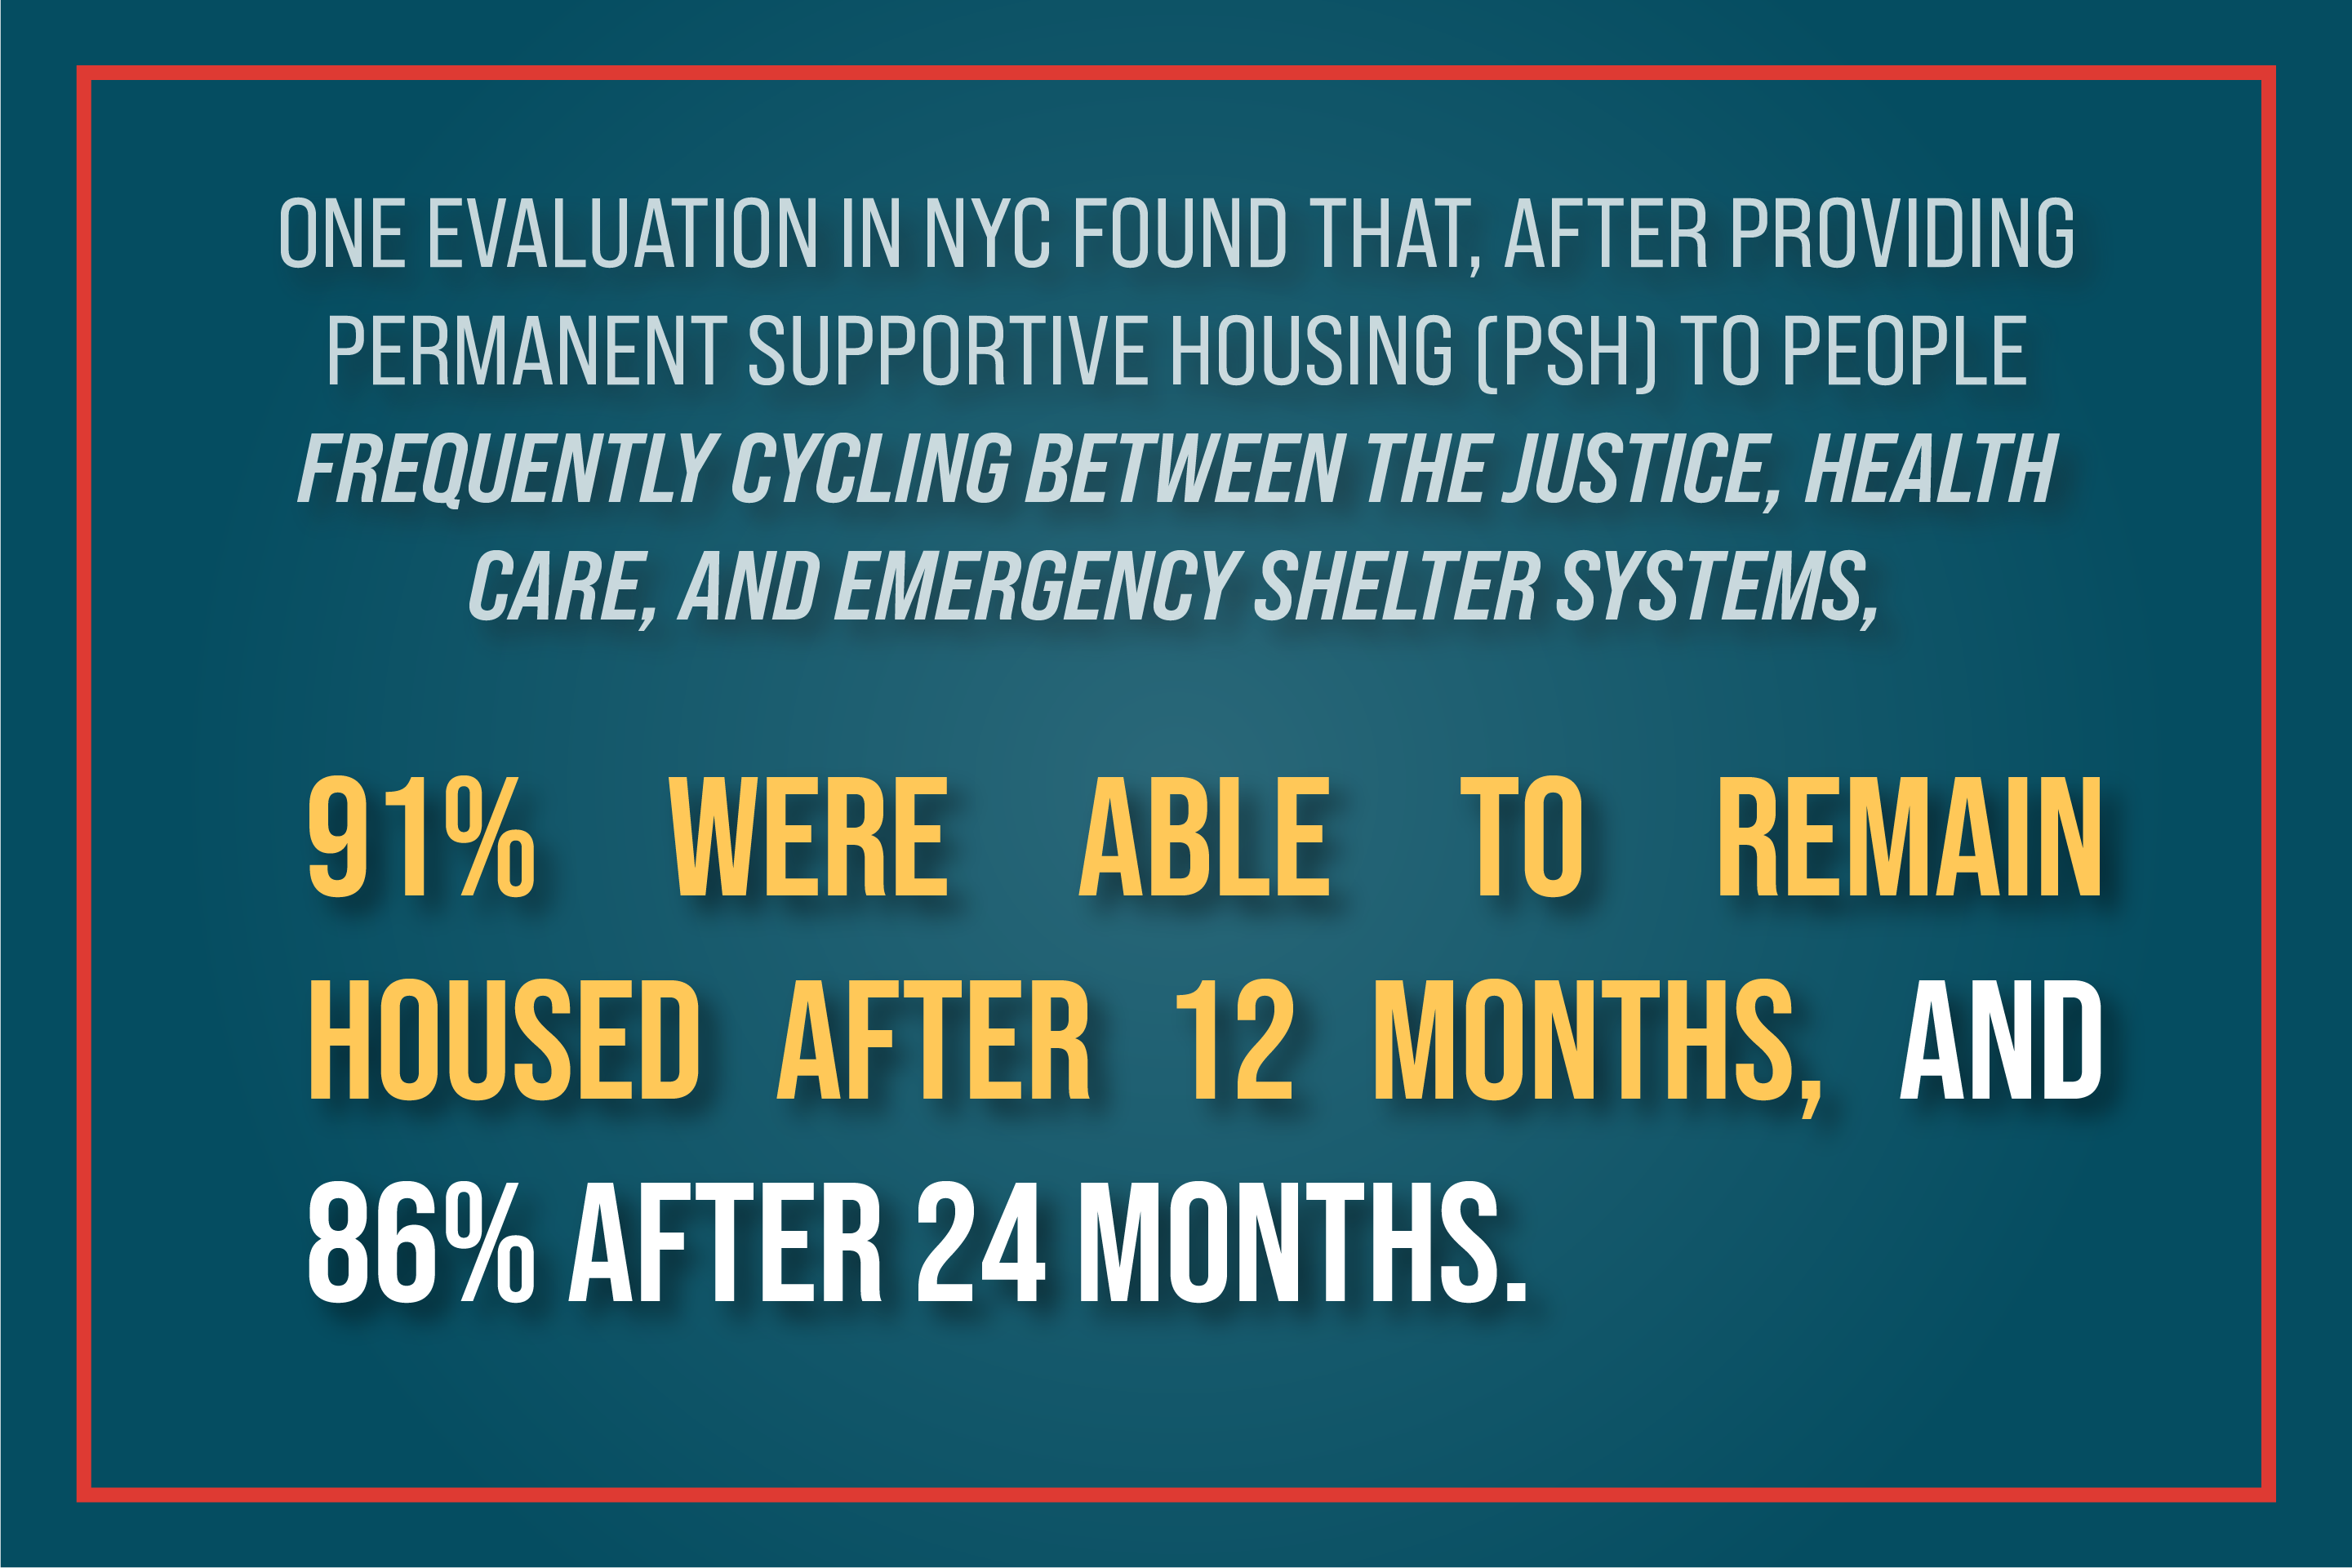 One evaluation found that, among people who were frequently cycling between the justice, health care, and emergency shelter systems, 91% were able to remain housed after 12 months, and 86% after 24 months. 